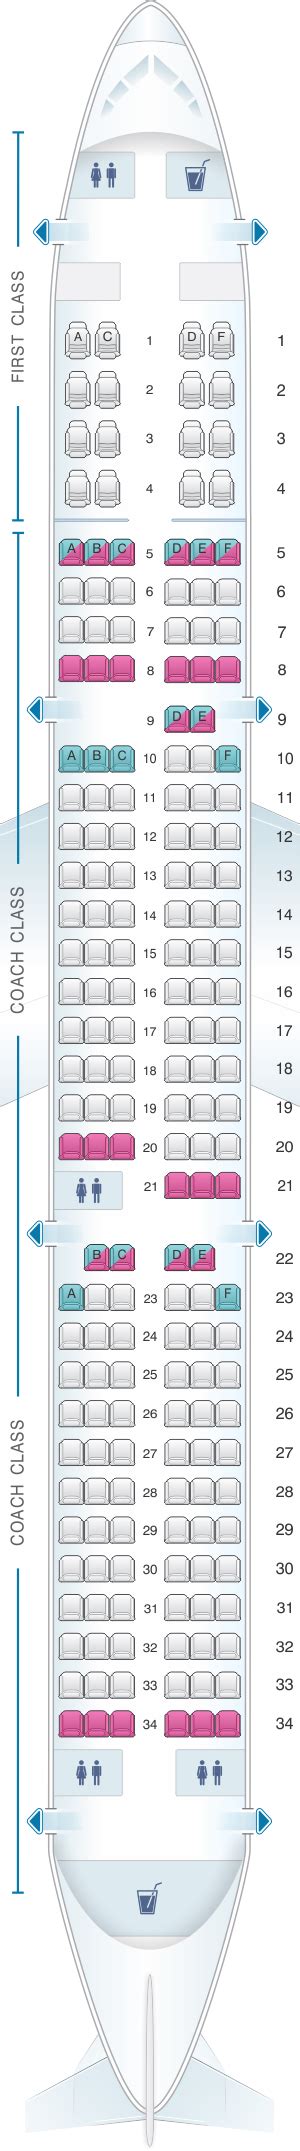 Airbus a321 seating map. Airbus A321neo Characteristics Seating Capacity: 189 seats Premium Cabin: 16 Pitch: 39" Seat Configuration: 2-2 Extra Comfort Premium Economy: 44 Pitch: 35" Seat Configuration: 3-3 Main Cabin: 129 Pitch: 30" Seat Configuration: 3-3 